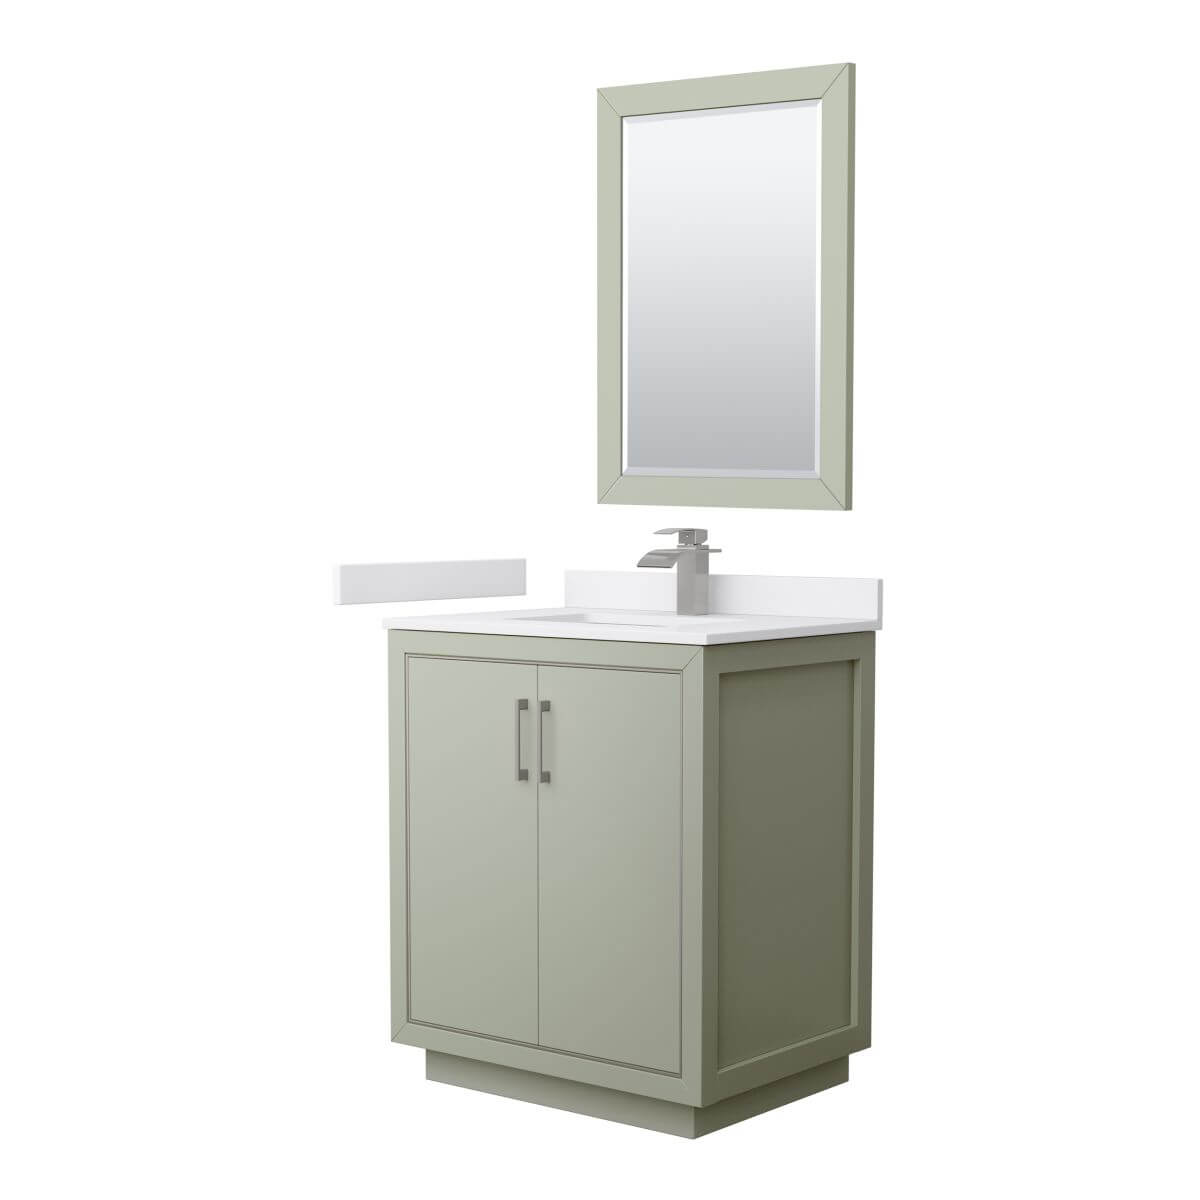 Wyndham Collection WCF111130SLGWCUNSM24 Icon 30 inch Single Bathroom Vanity in Light Green with White Cultured Marble Countertop, Undermount Square Sink, Brushed Nickel Trim and 24 Inch Mirror